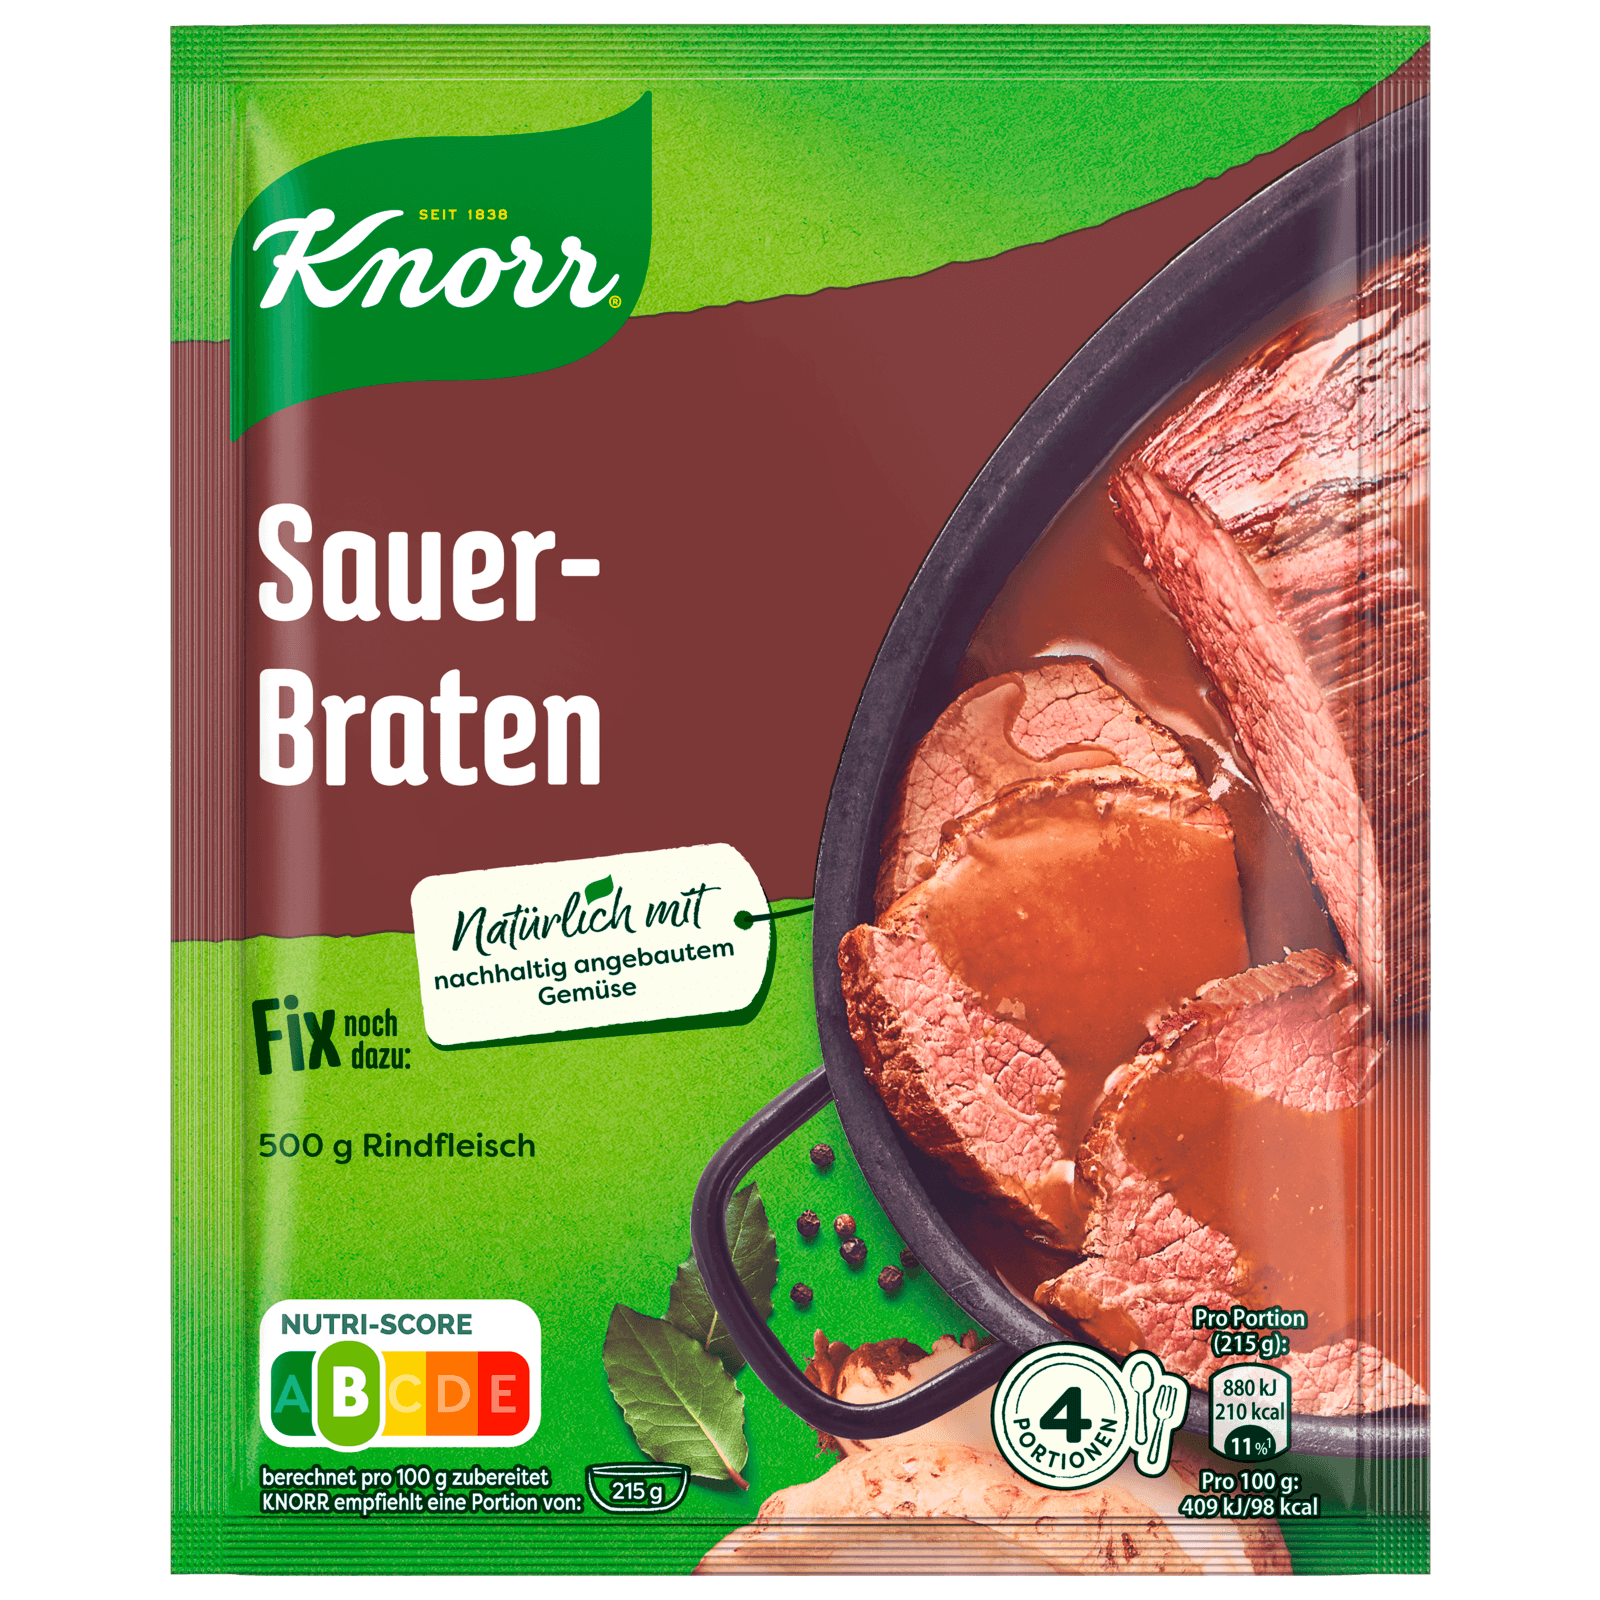 dry mix most like knorr sauerbraten